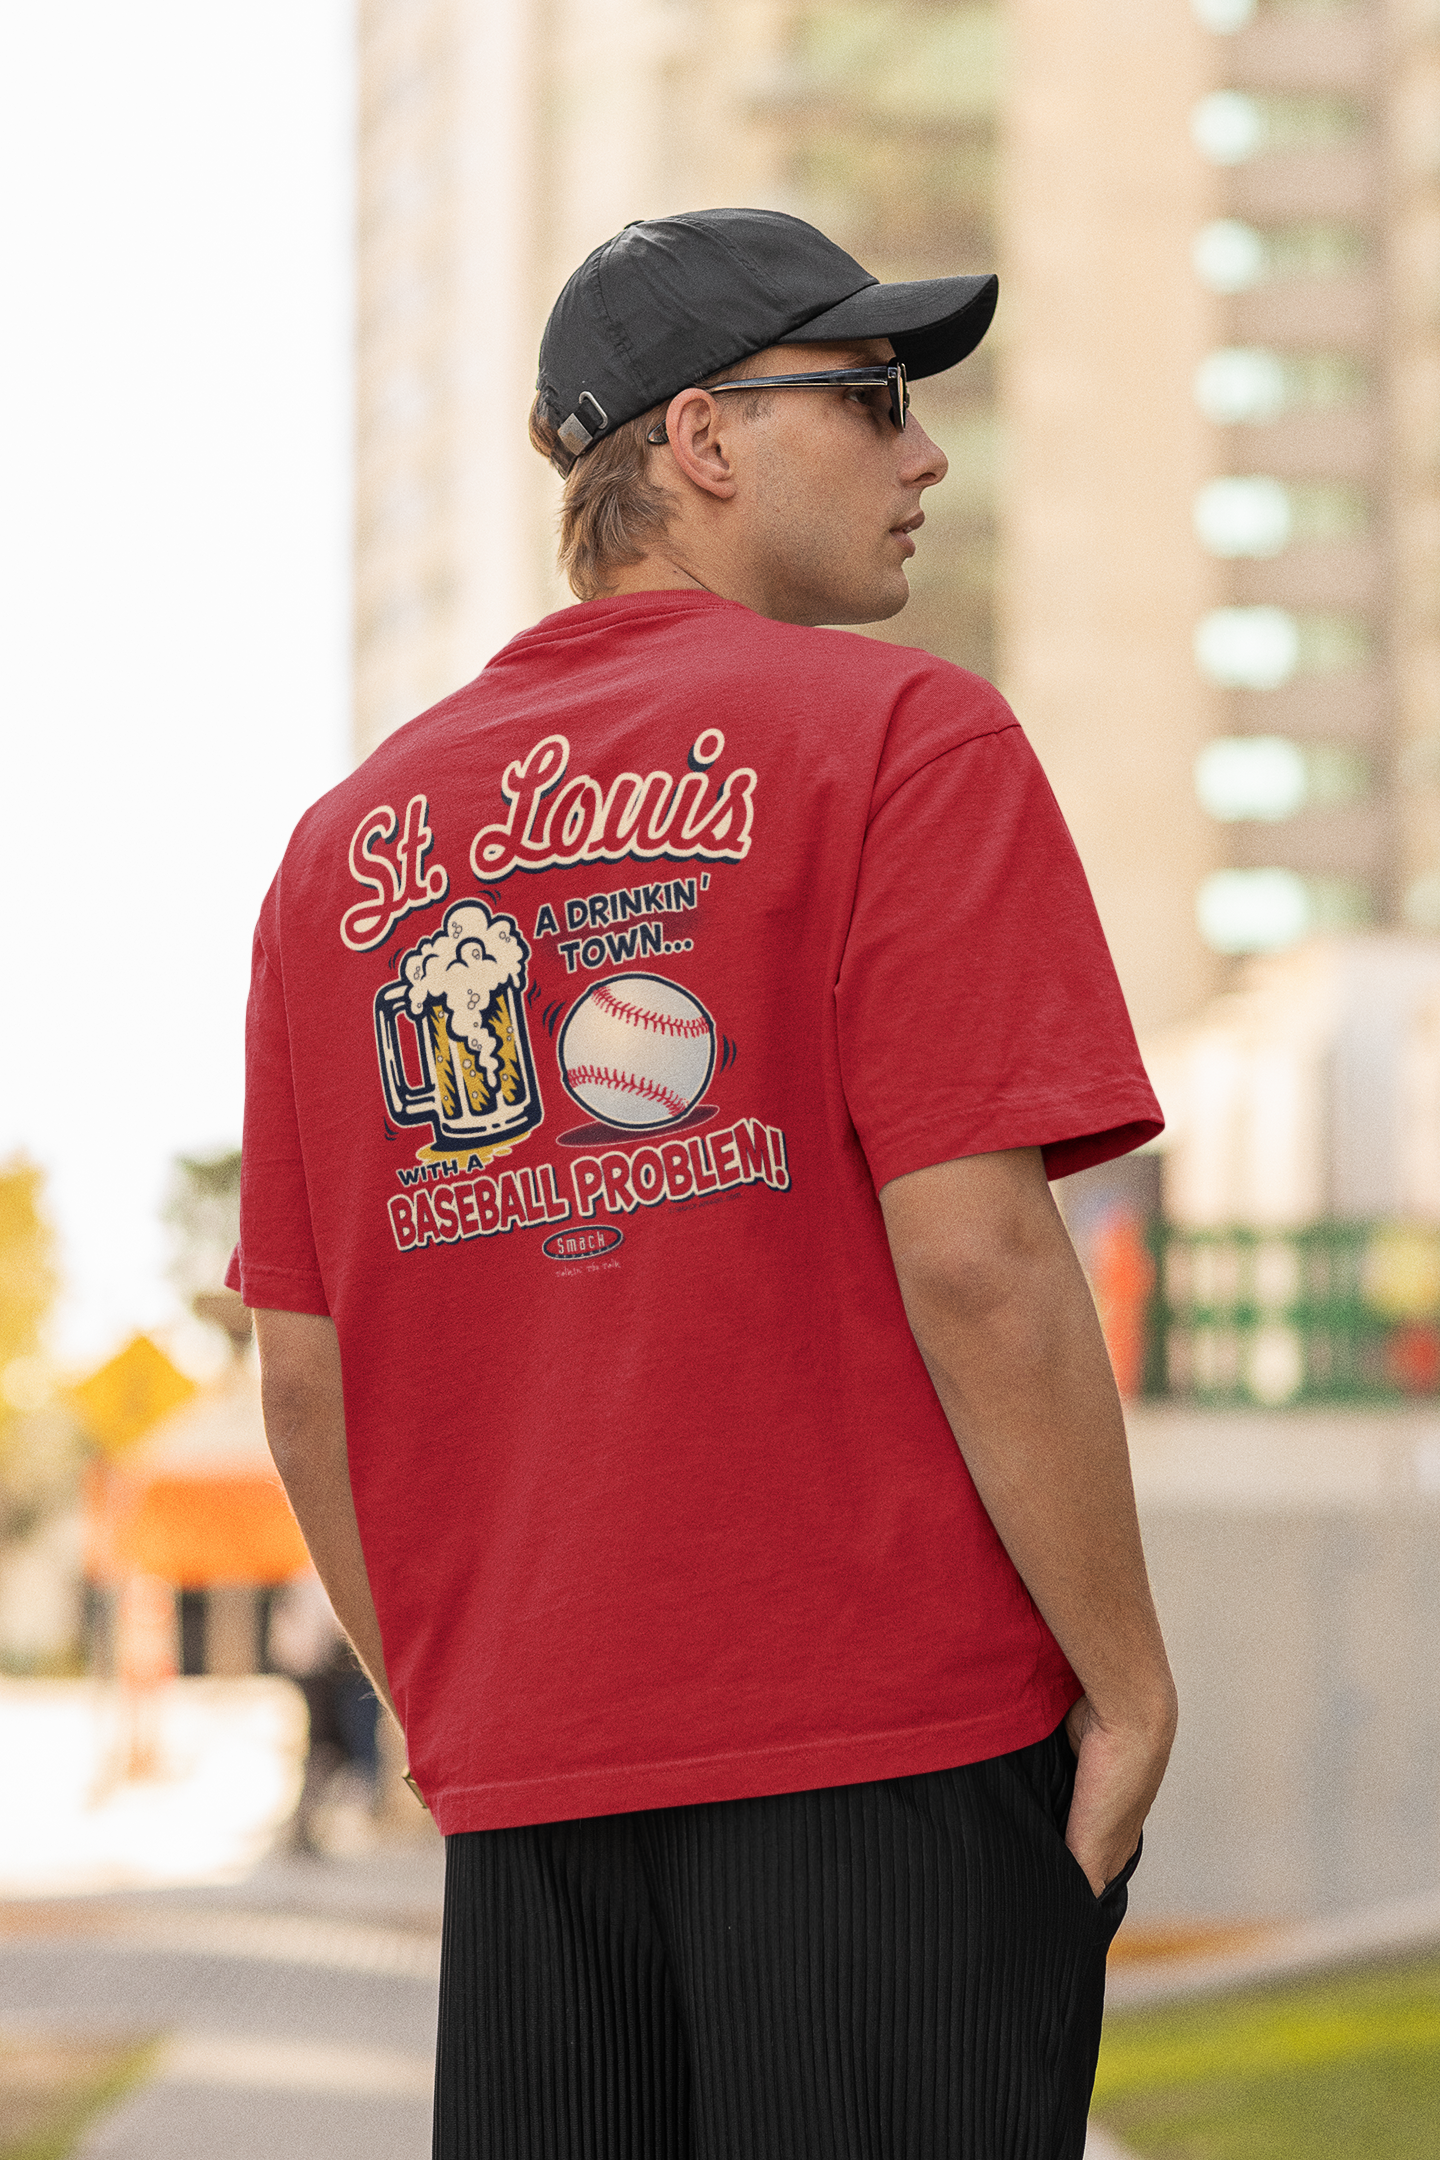 St. Louis Pro Baseball Apparel  St. Louis a Drinking Town with a